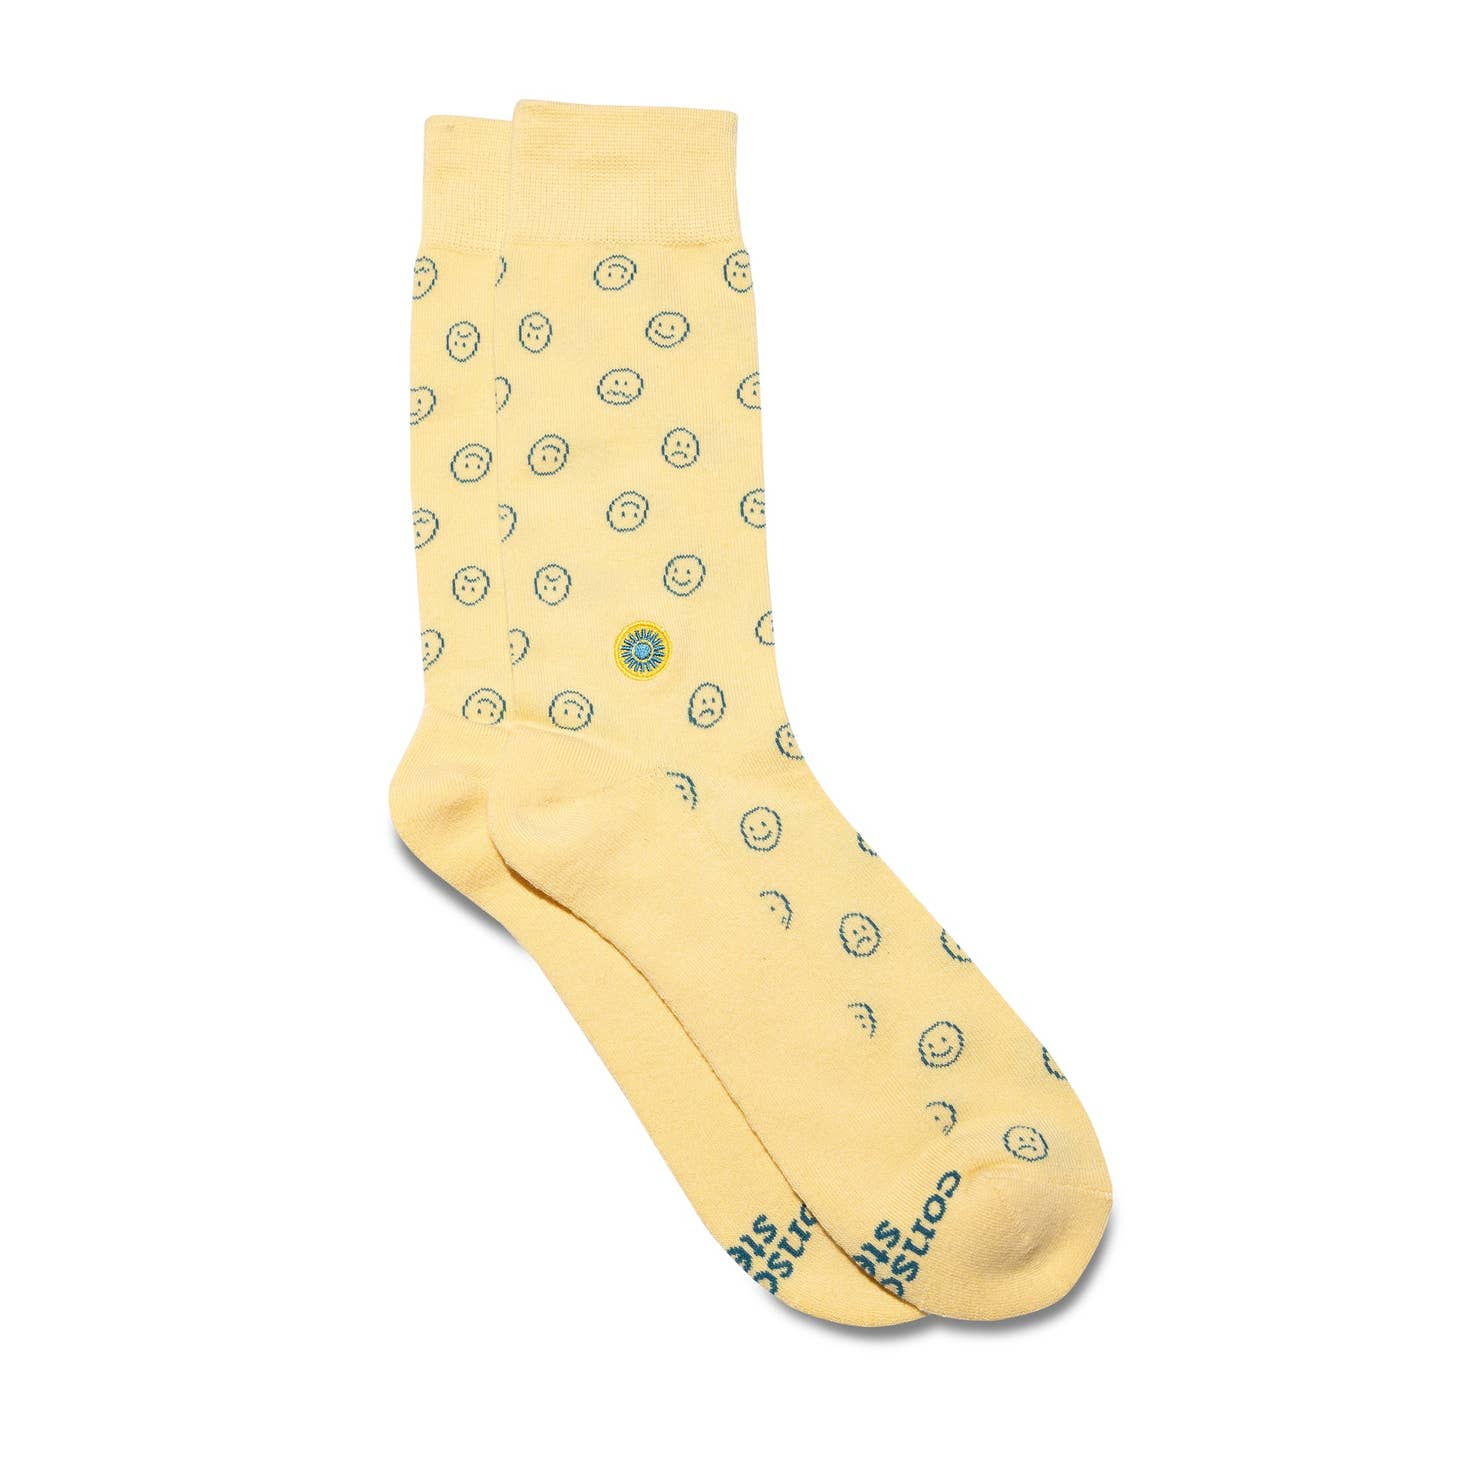 Sunshine yellow Smiley Face Socks that support mental health